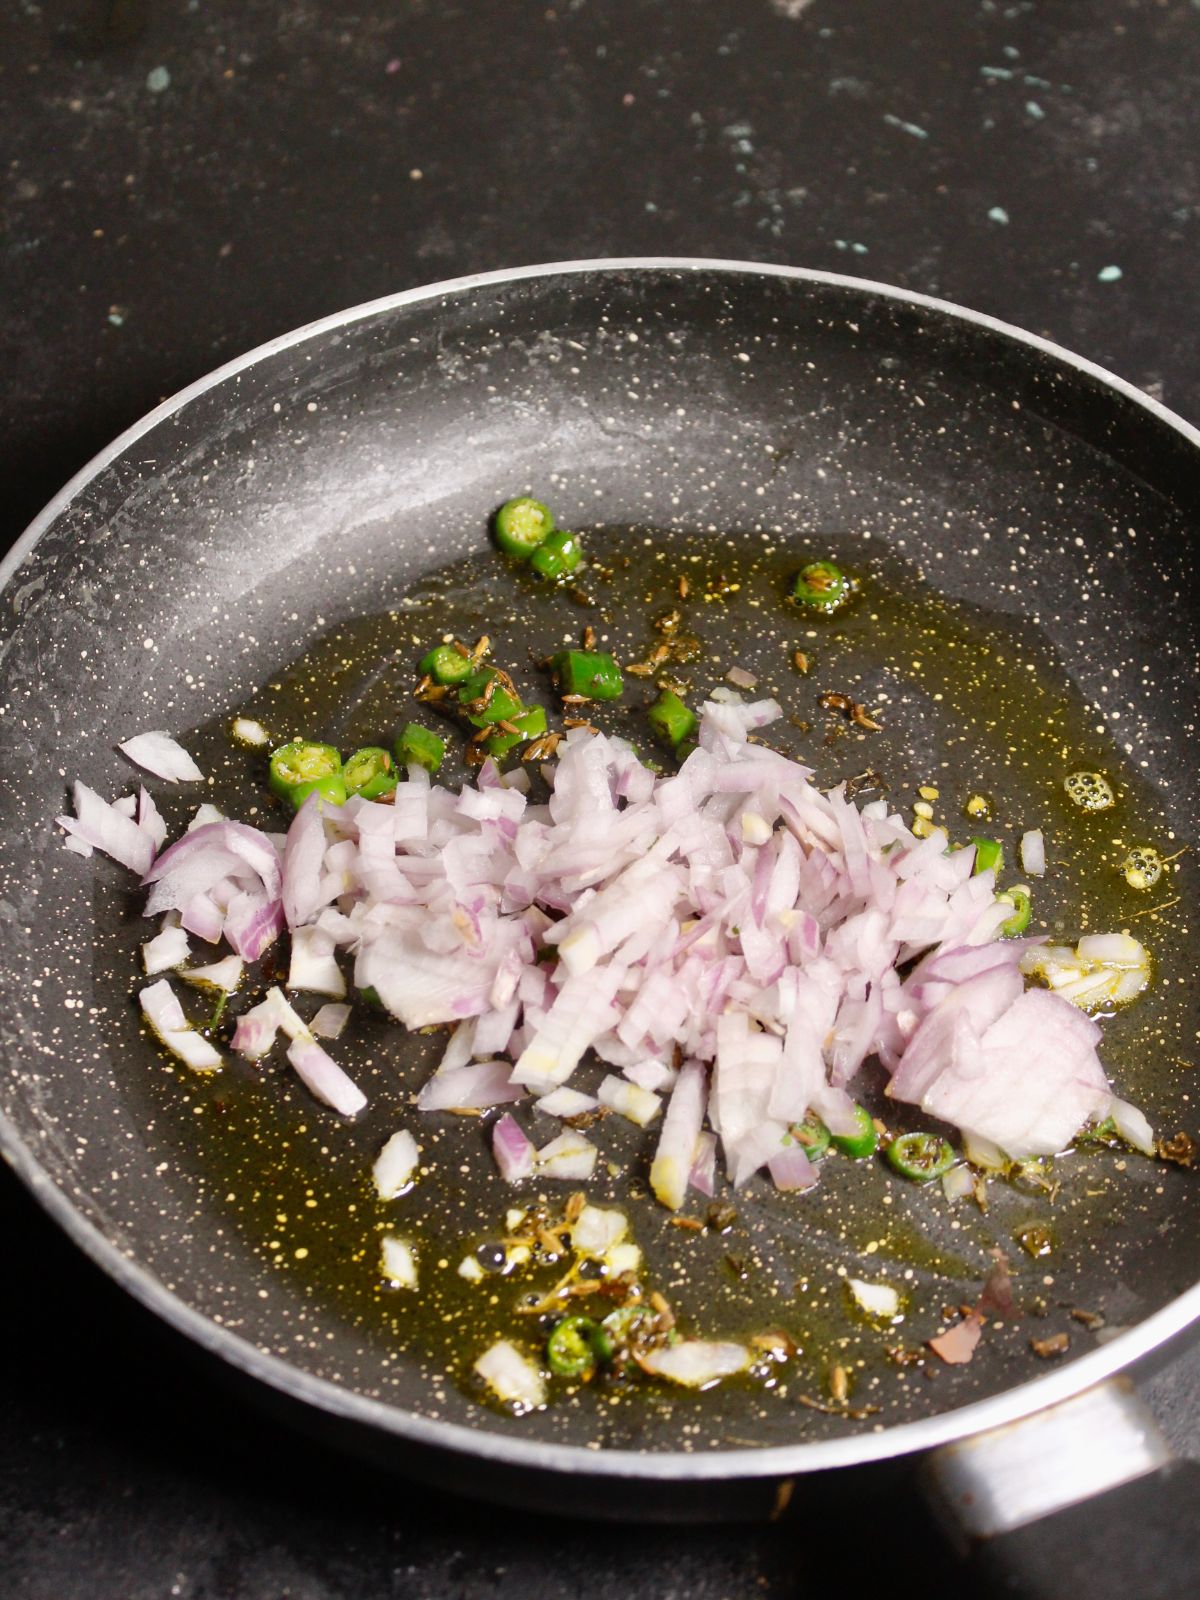 Add chopped onions to the pan and saute 